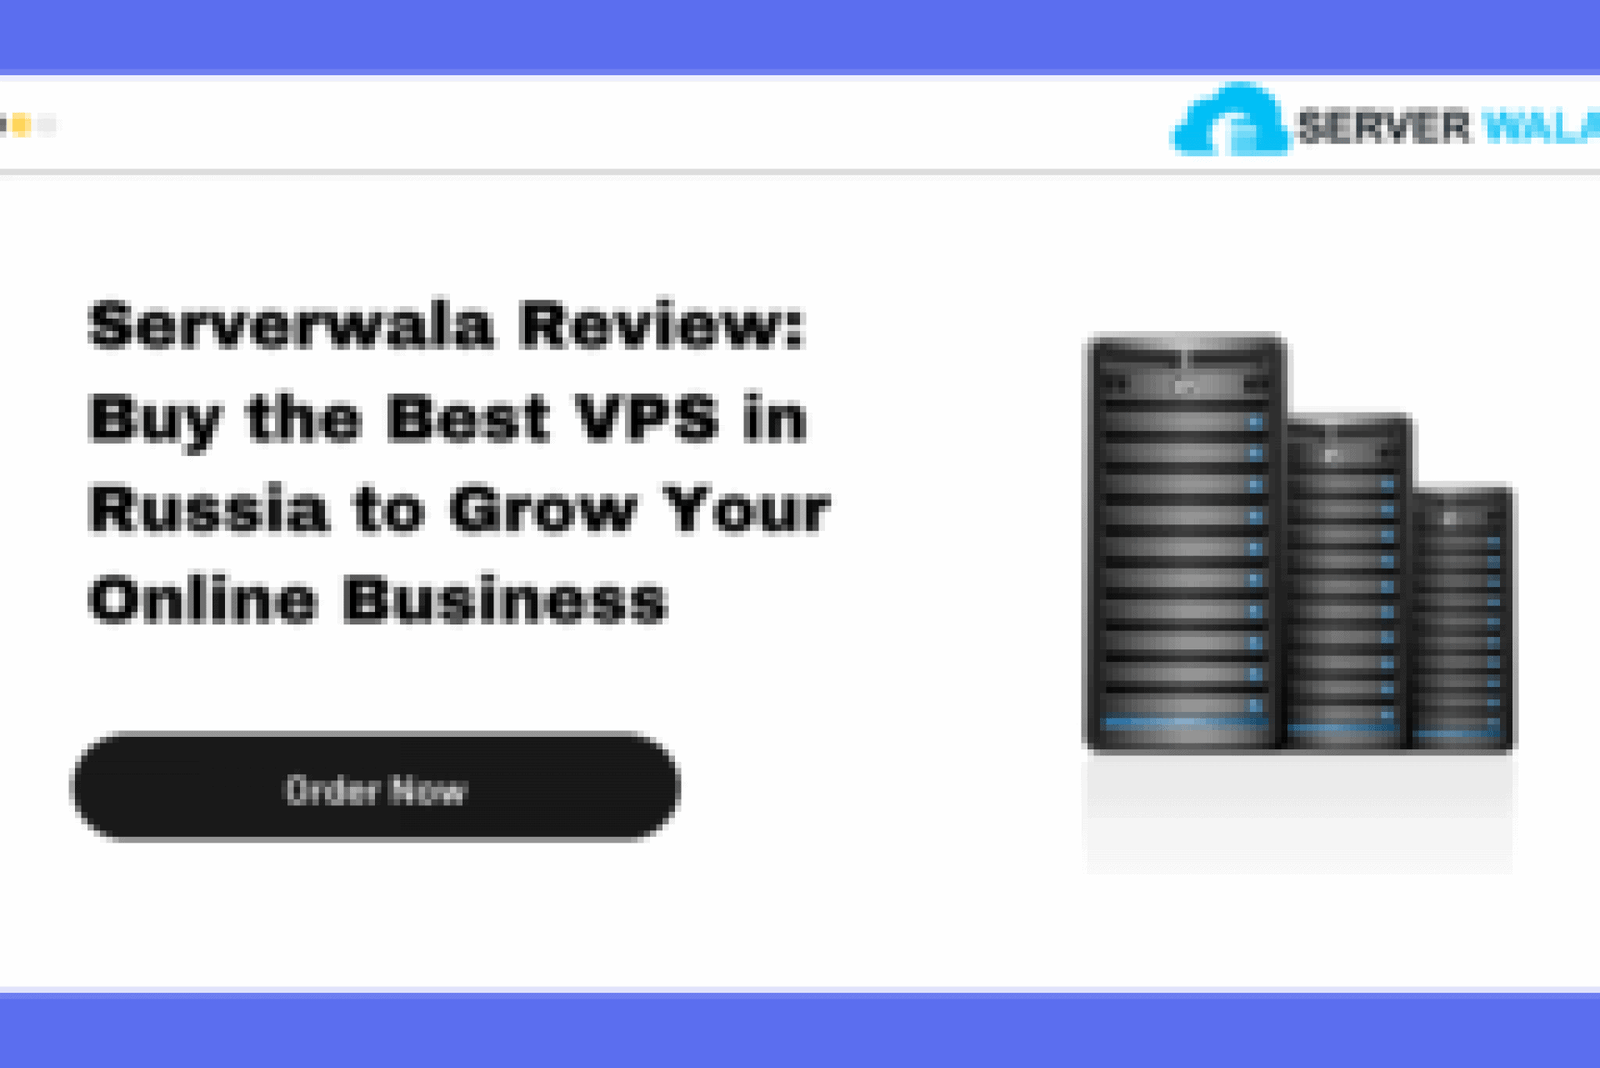 Serverwala Review: Buy the Best VPS in Russia to Grow Your Online Business